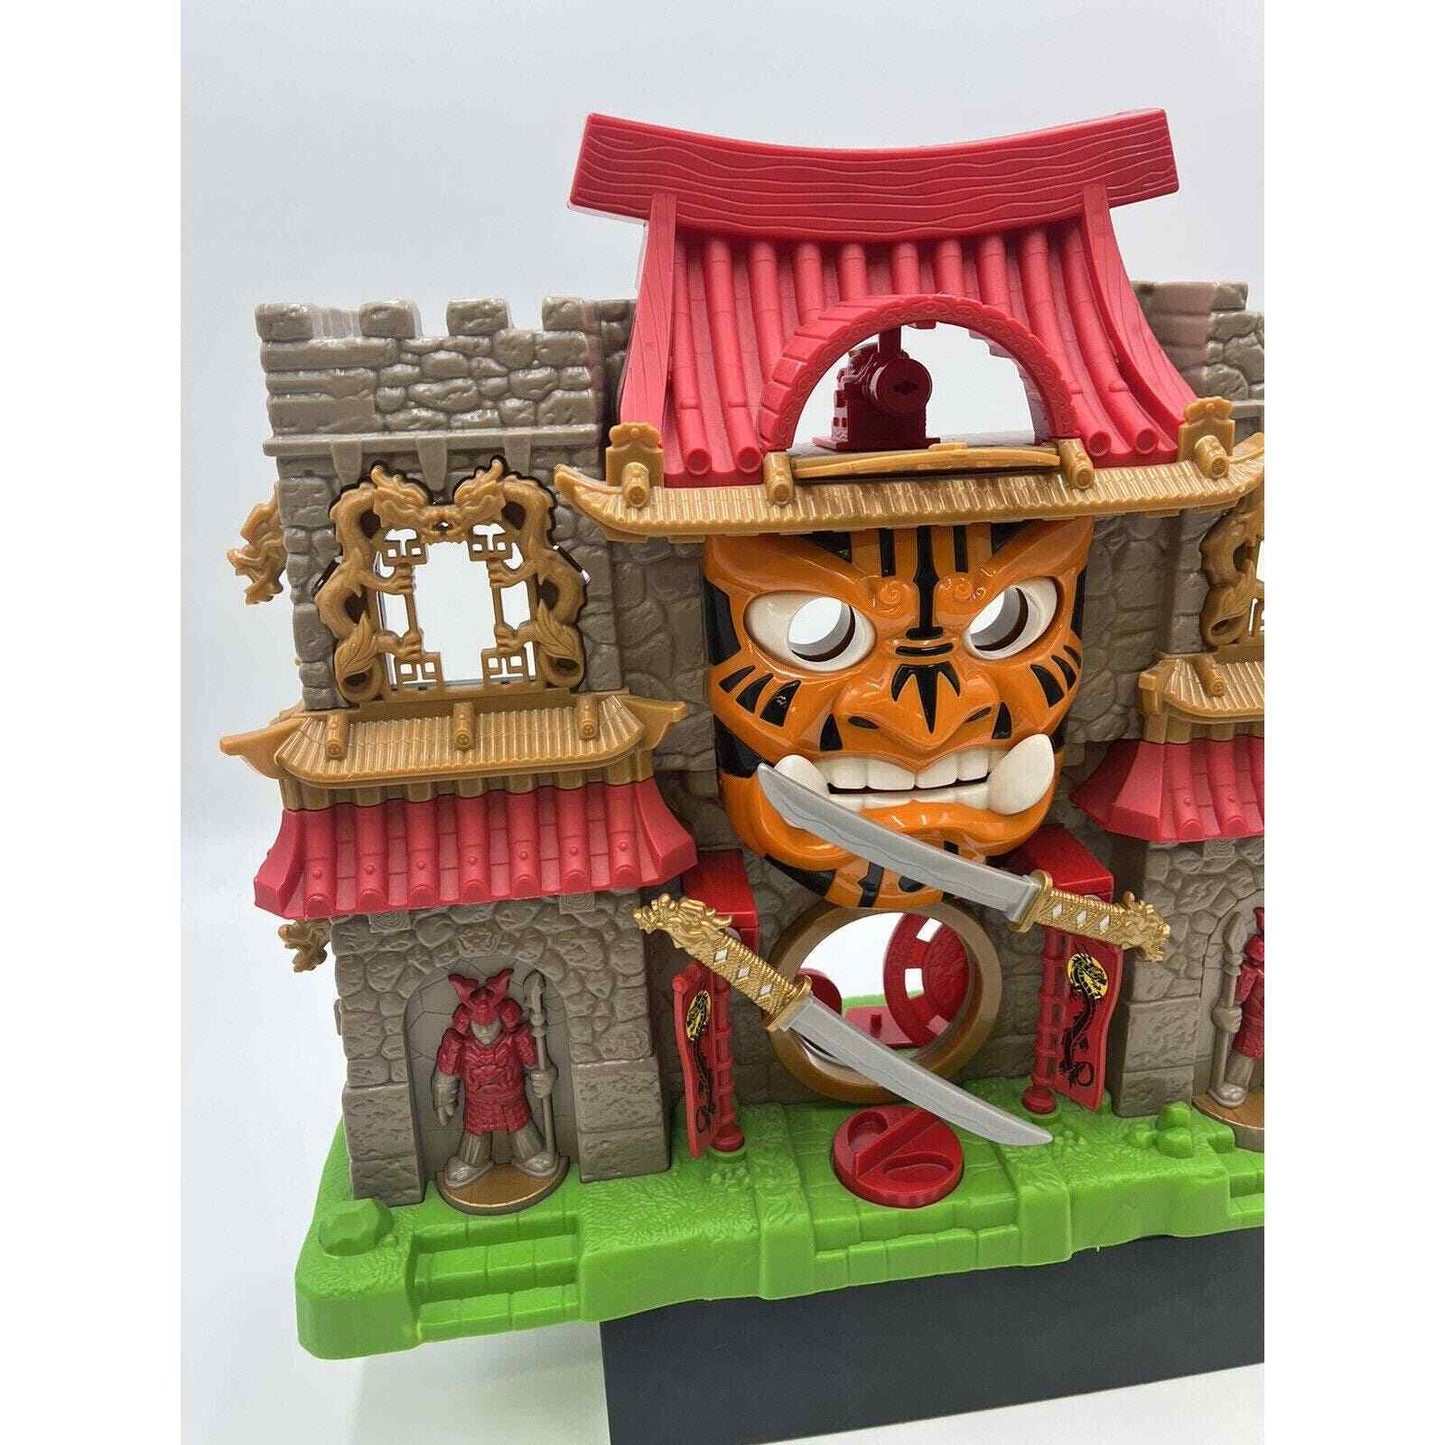 Fisher-Price IMAGINEXT SAMURAI CASTLE red Feudal Japan 2011 Toy-l W/ Figures